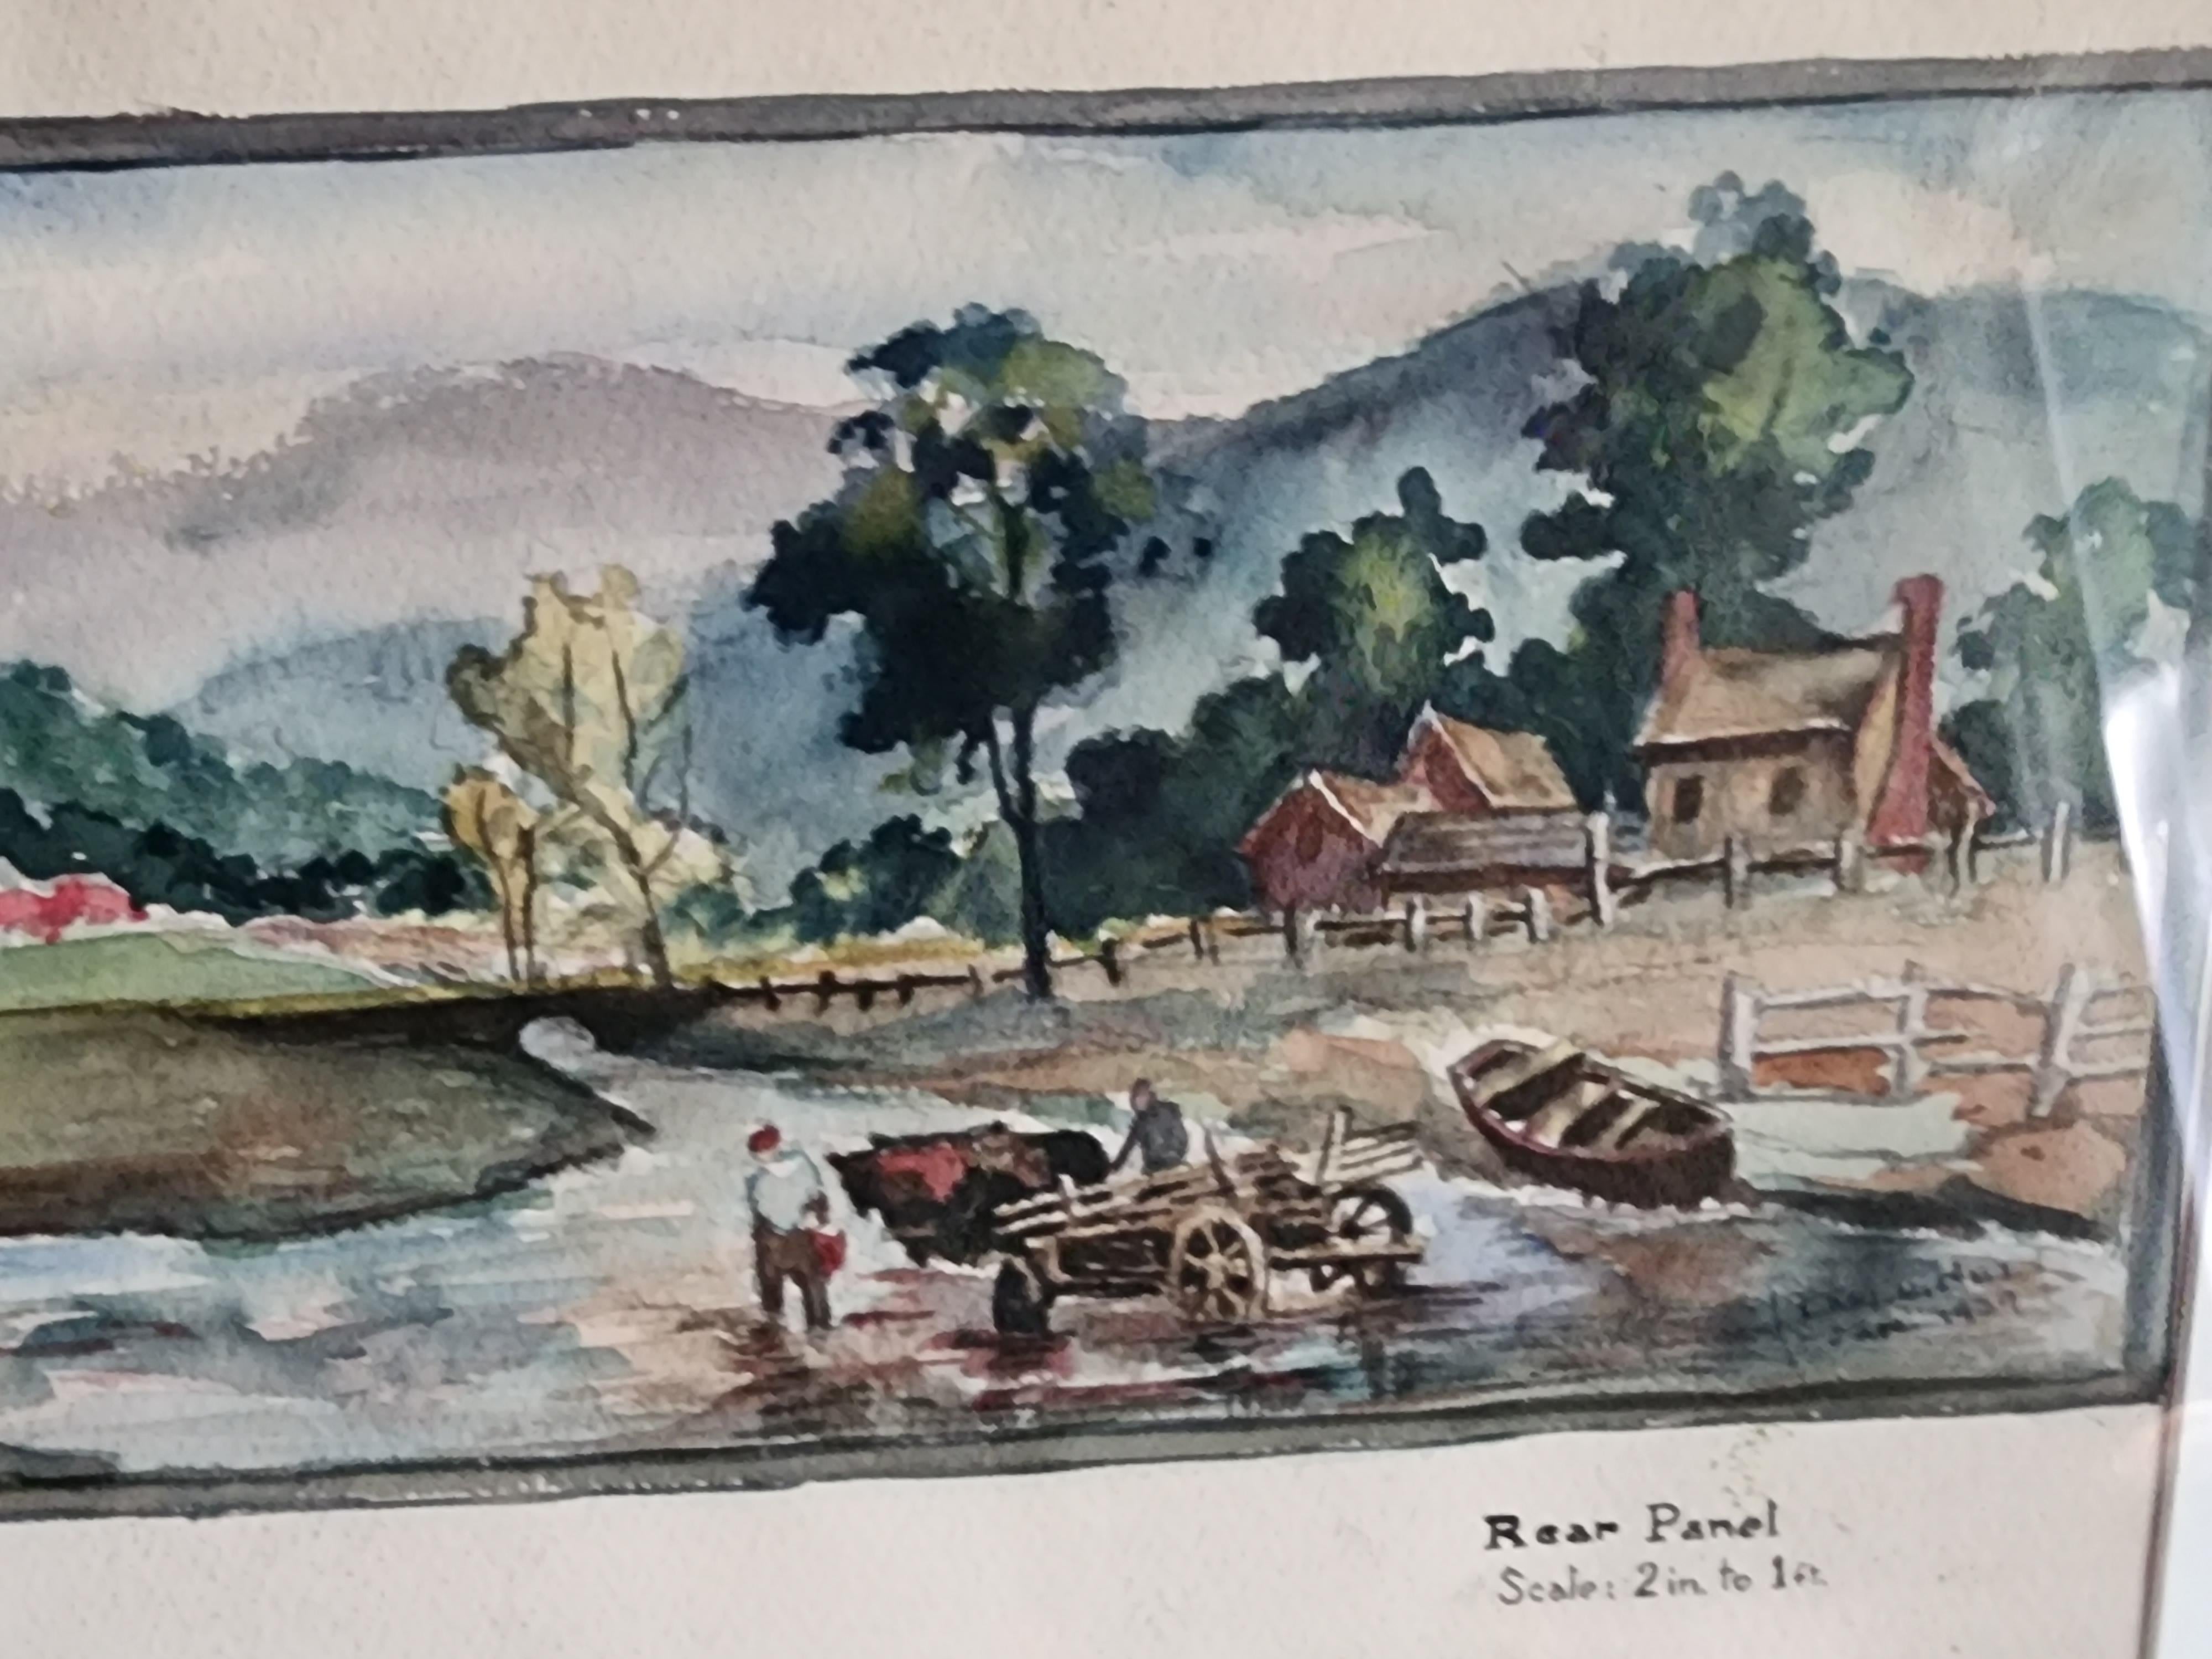 Rgrfinearts presents a rare WPA mural study by the African American artist Carl G. Hill.

Mr. Hill was a student at the National Academy of Design and also at the Harkem Community School where he studied under Riva Helfond.

During WW2 he enlisted